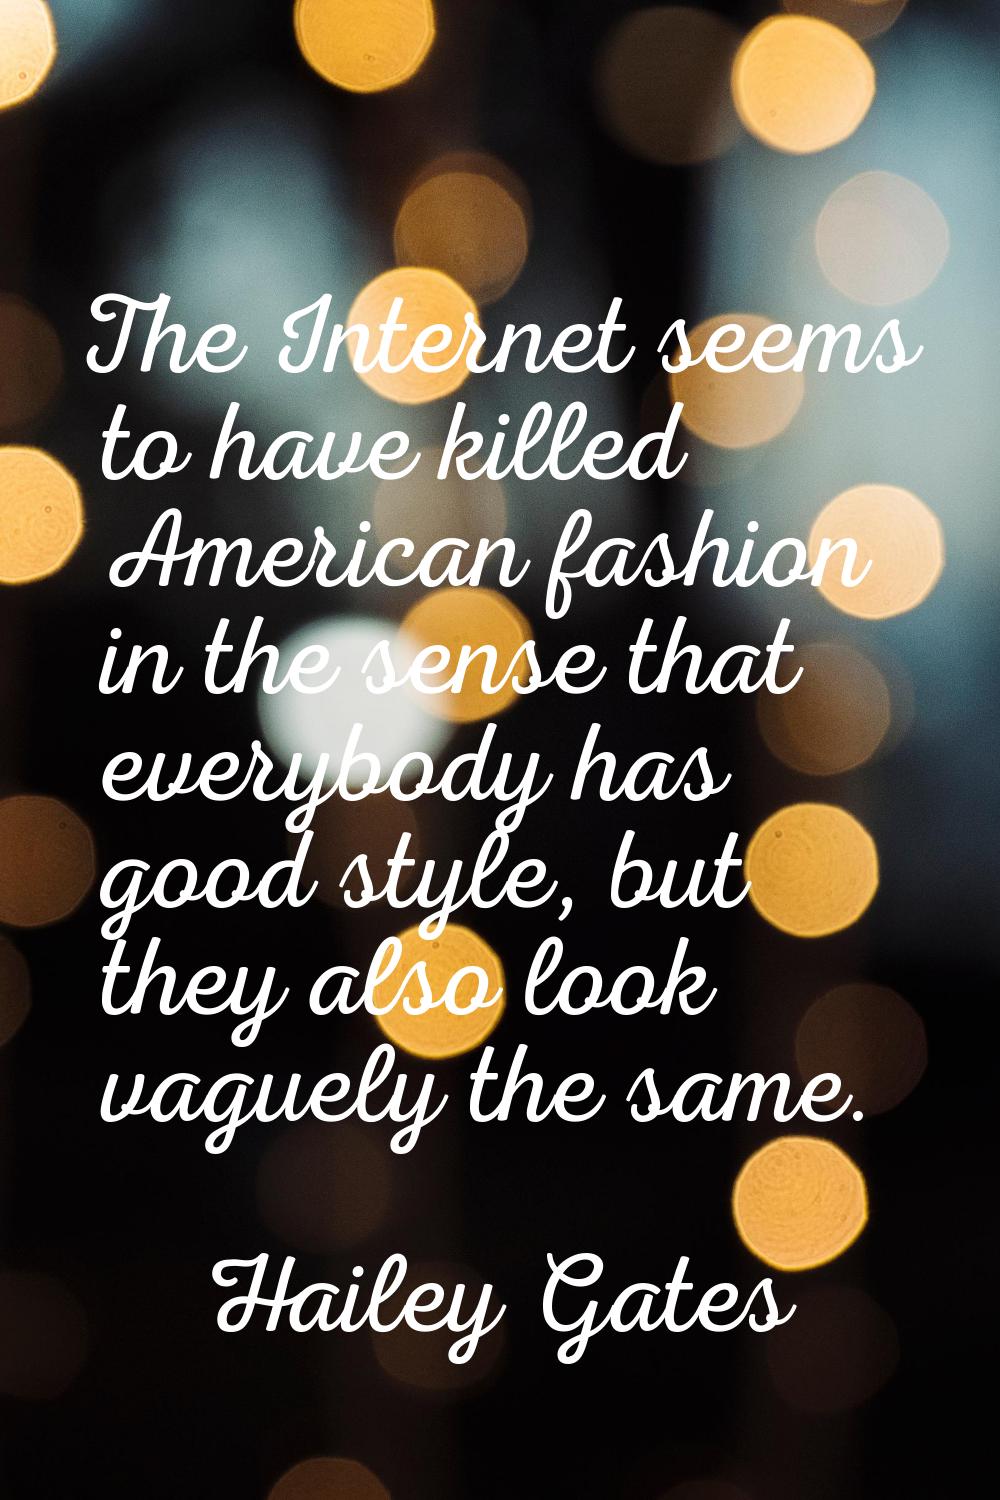 The Internet seems to have killed American fashion in the sense that everybody has good style, but 